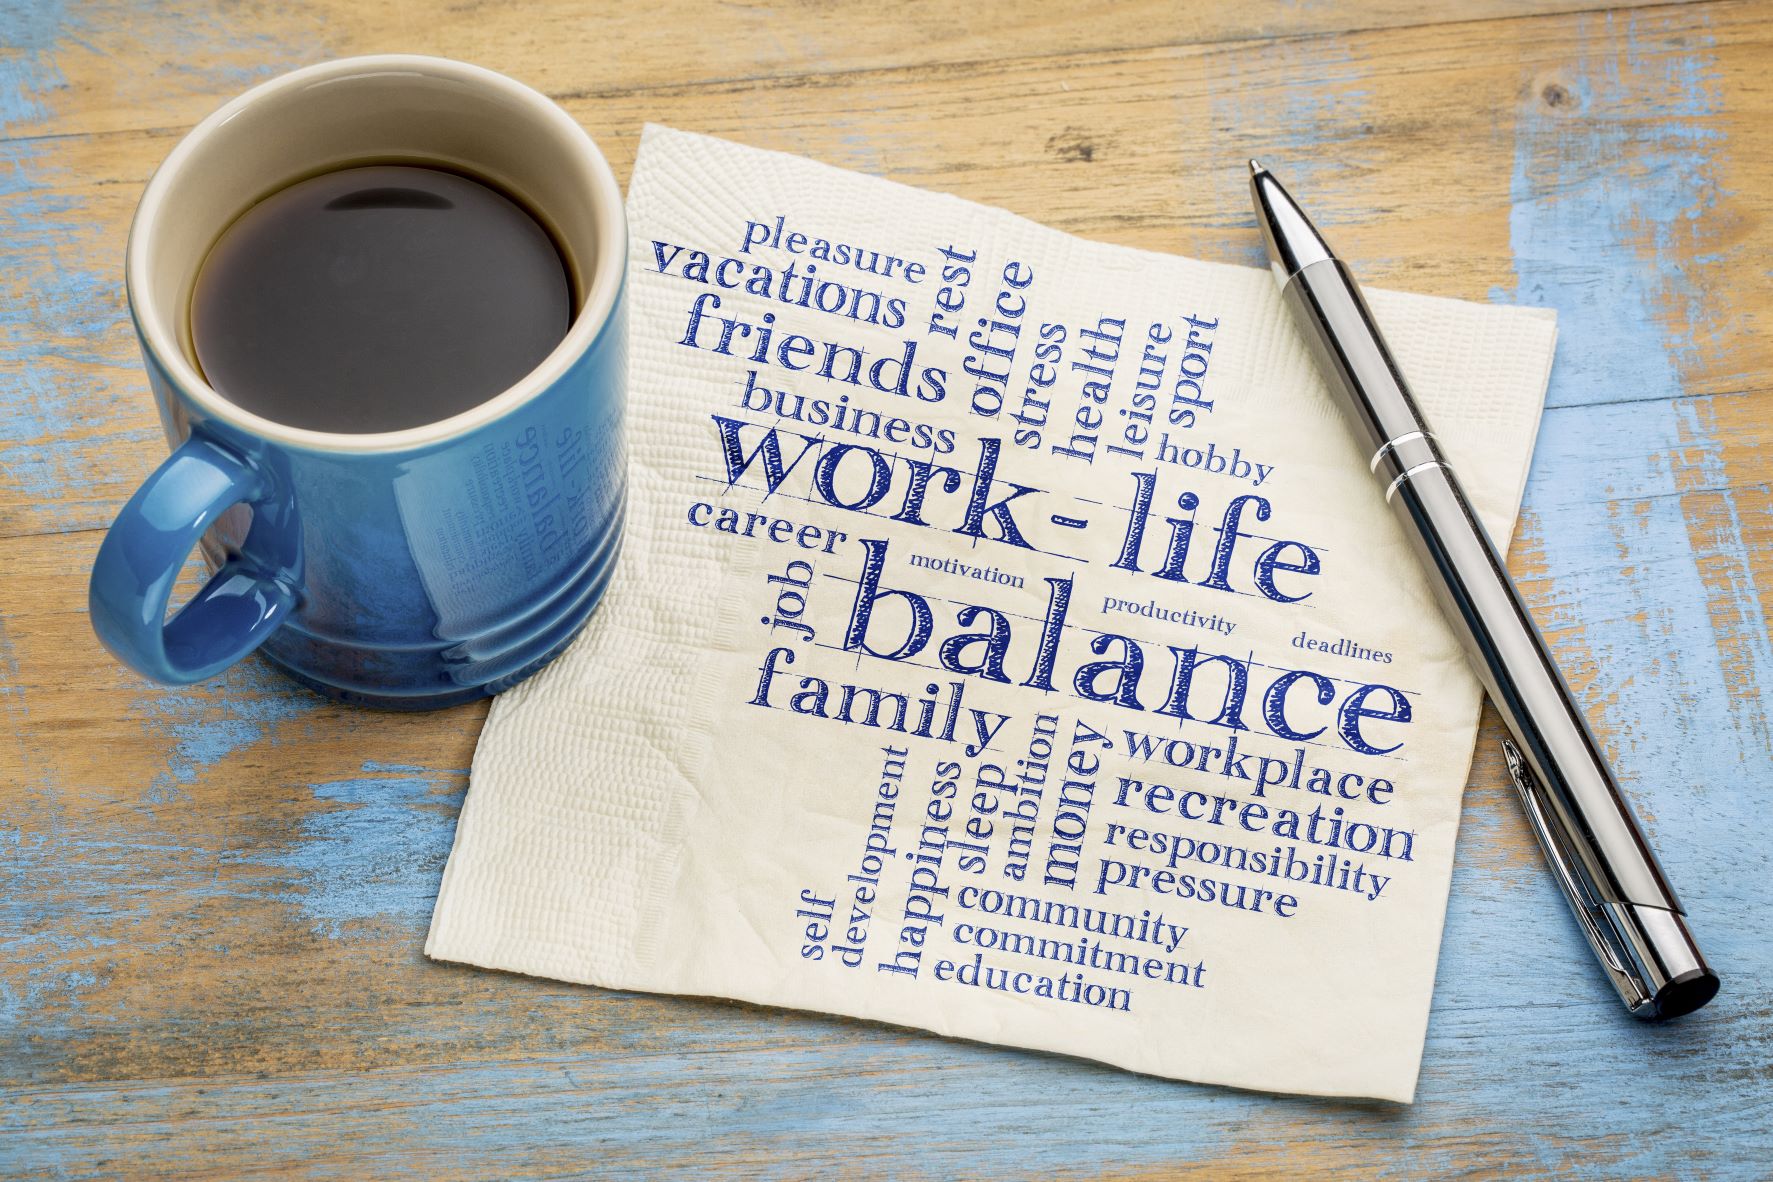 https://www.awesomejourney.ca/that-thing-called-work-life-balance/